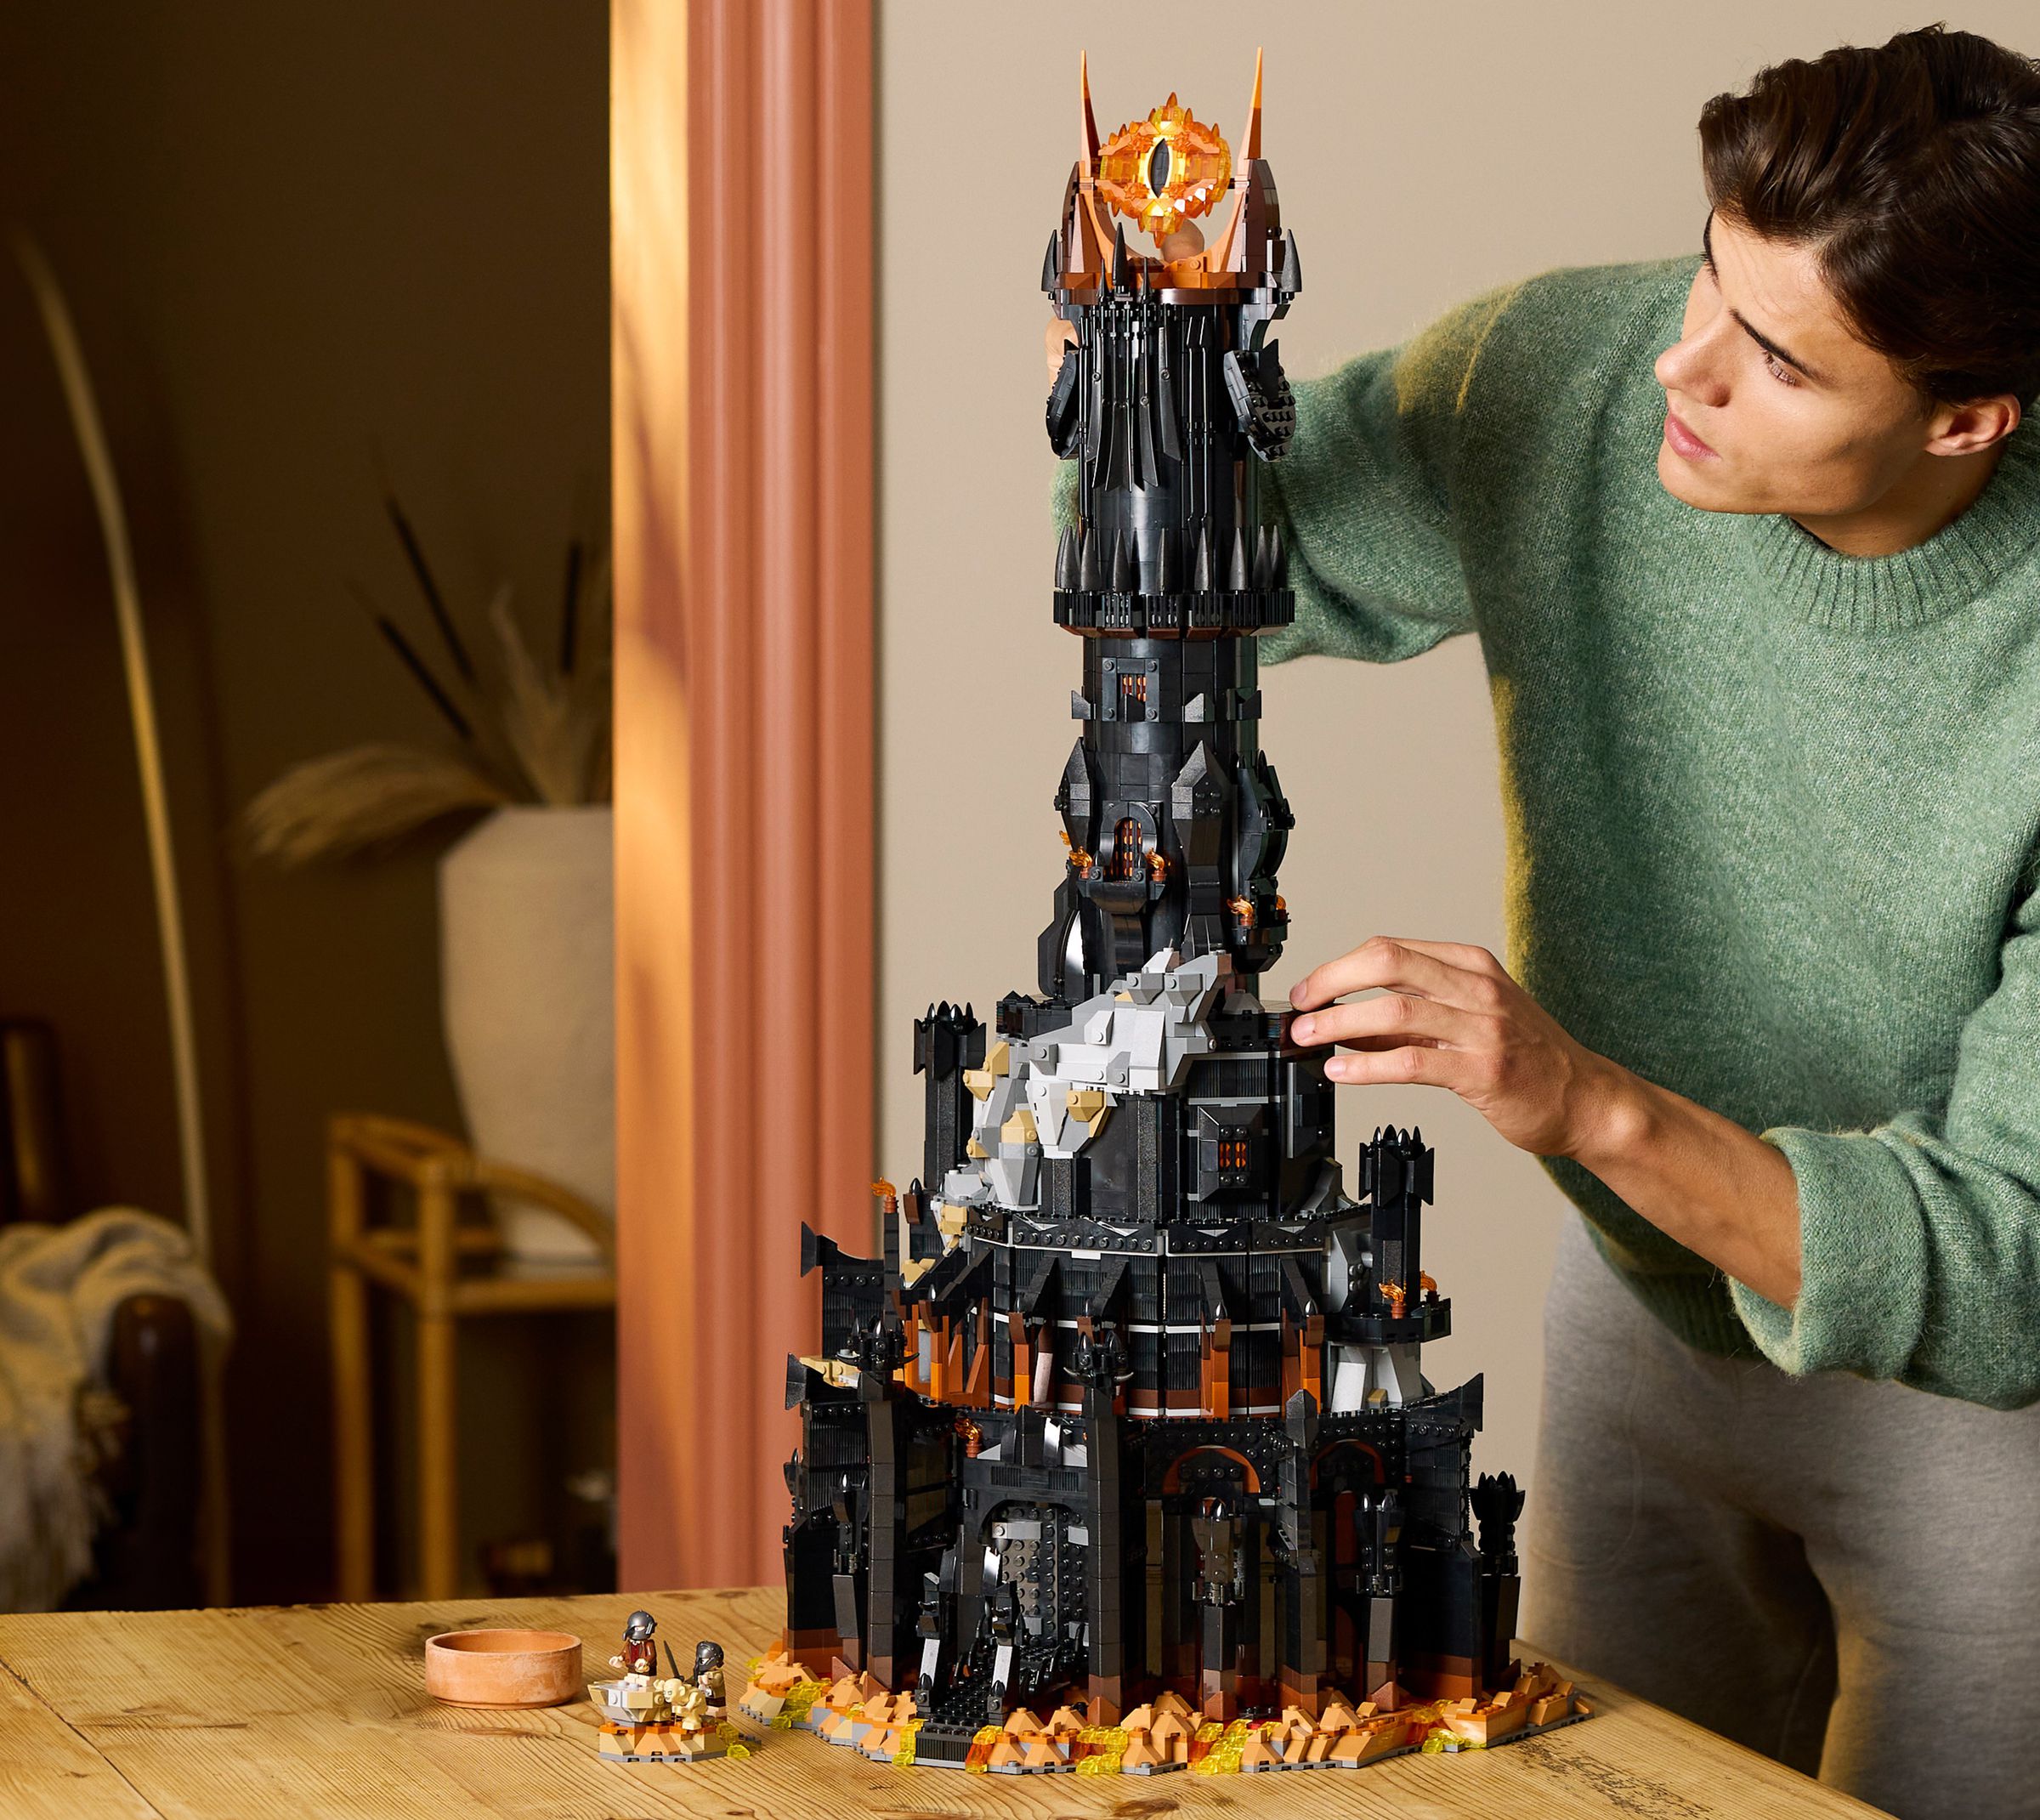 A man stands next to a black tower made of lego bricks nearly as tall as he is (thanks to a table) with a giant flaming eye on top